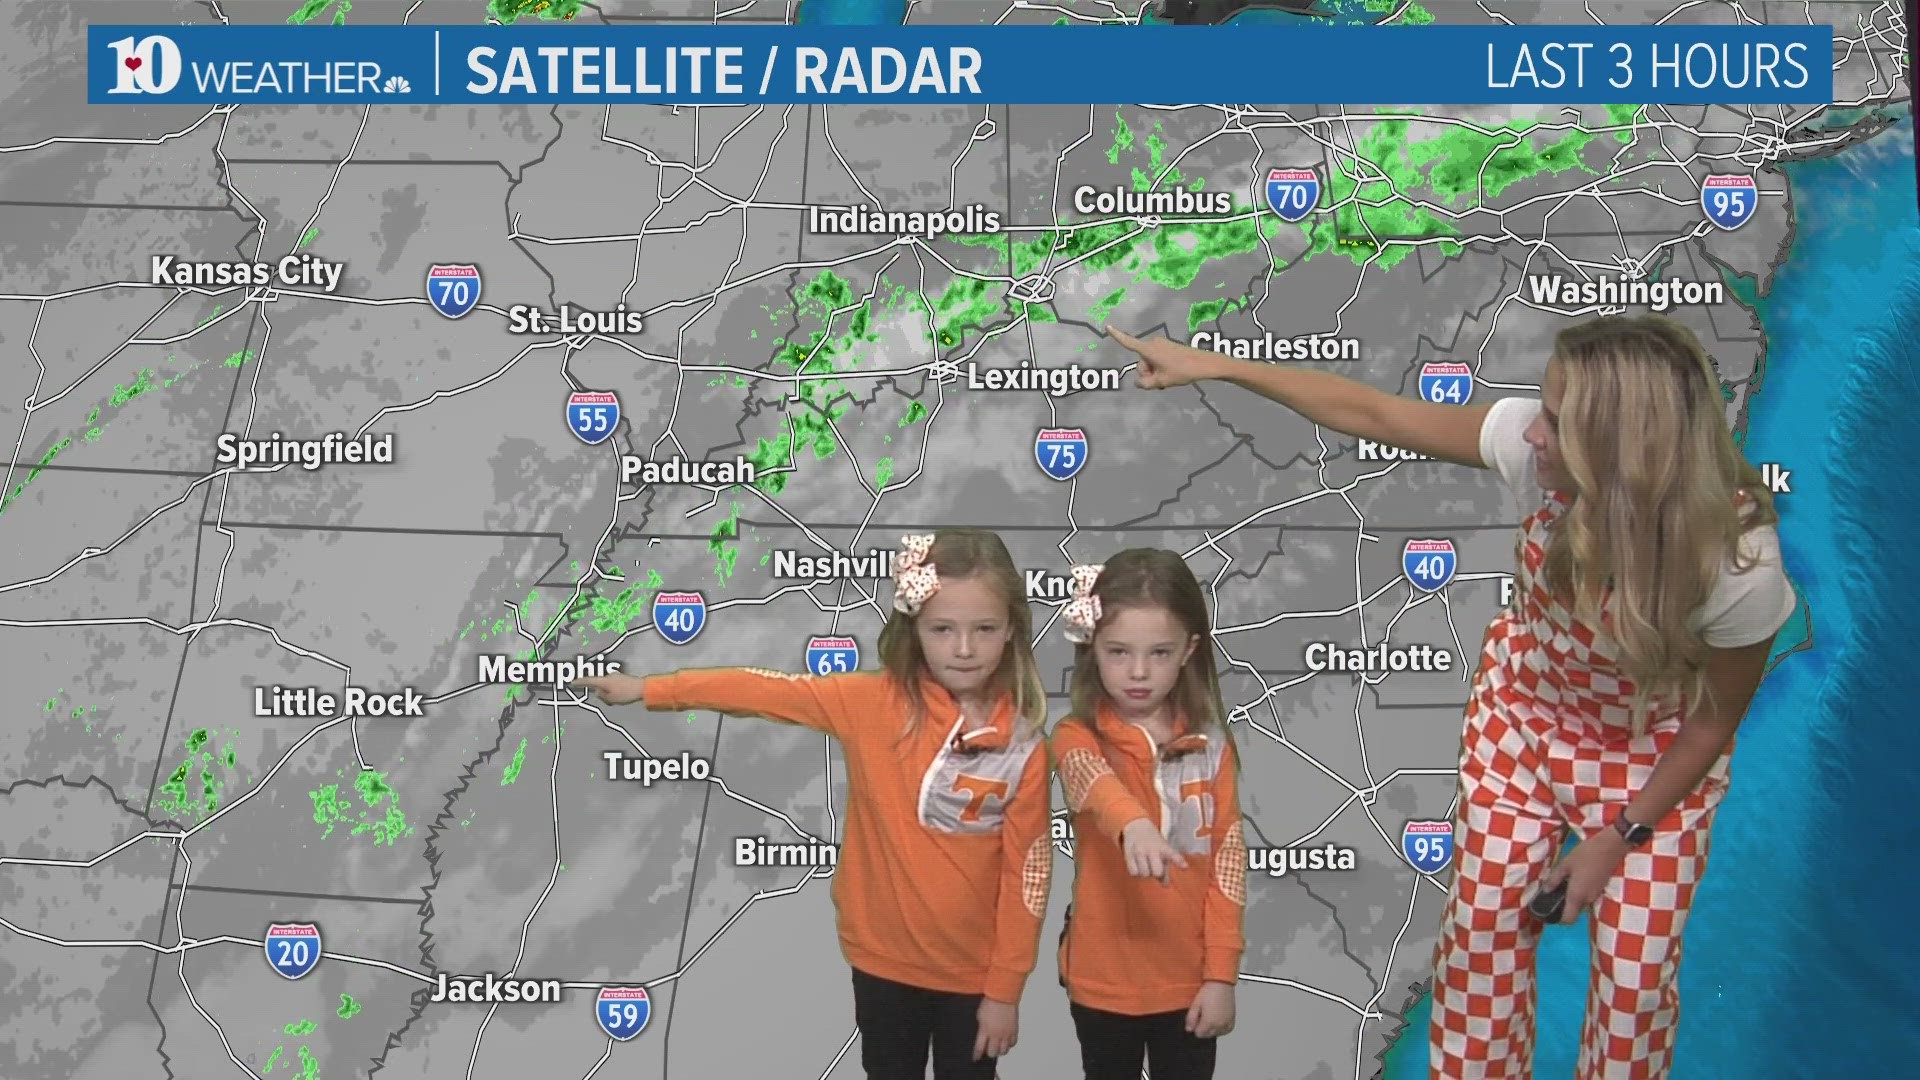 Vivian and Evelyn love learning about the weather and enjoy watching Rebecca give the forecast. They also want to be meteorologists someday.